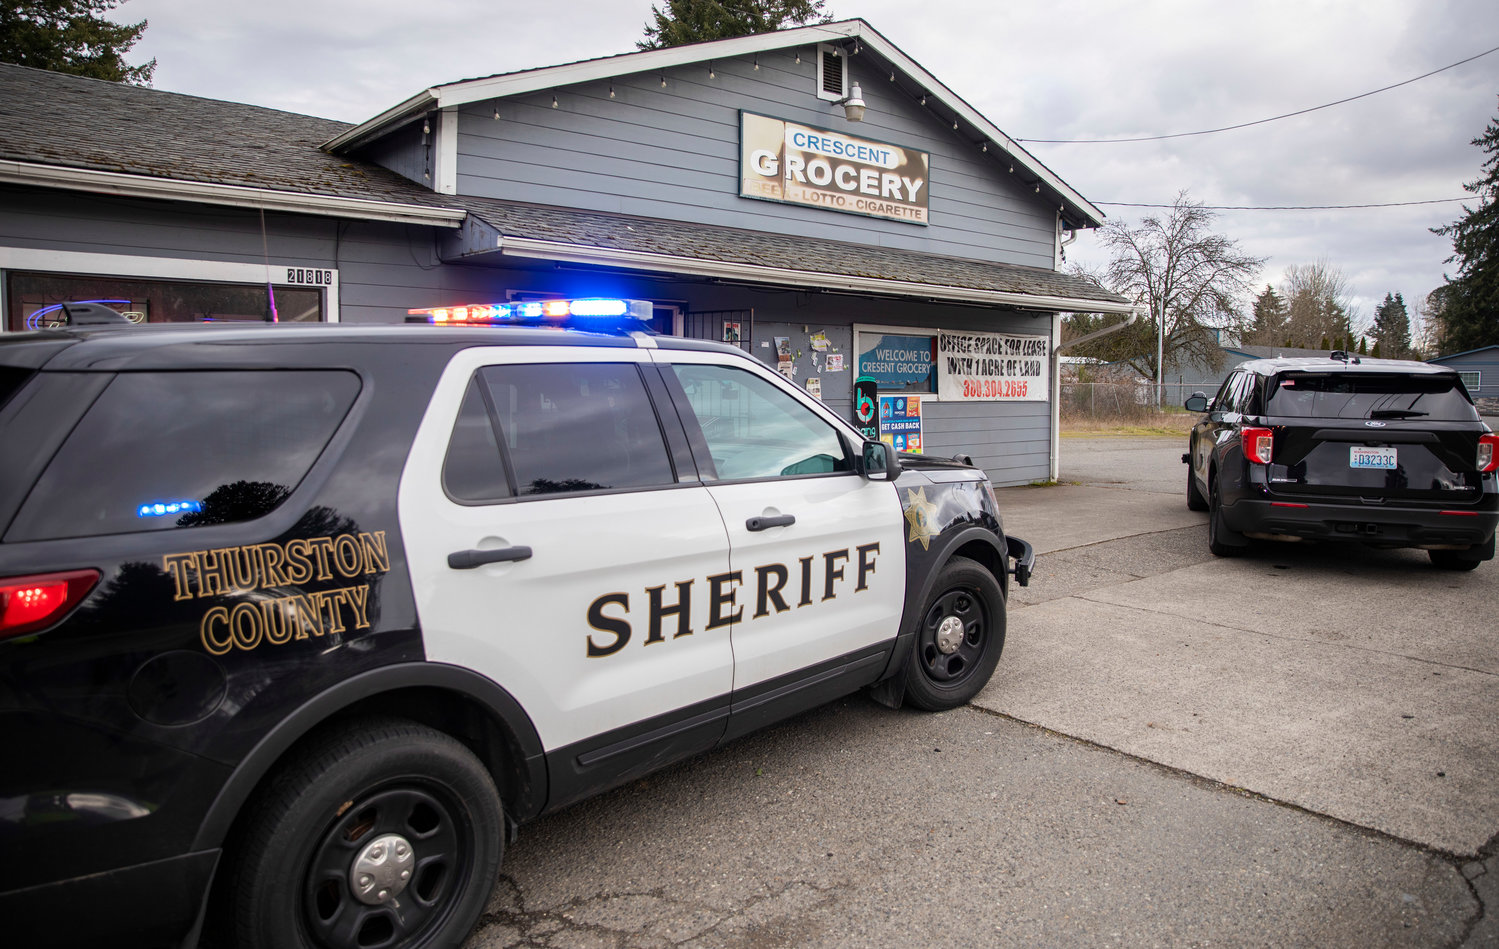 Thurston County Sheriff's Office vehicles sit parked outside of the Crescent Grocery store located at 21816 Old Highway 99 Southwest in Centralia on Wednesday.